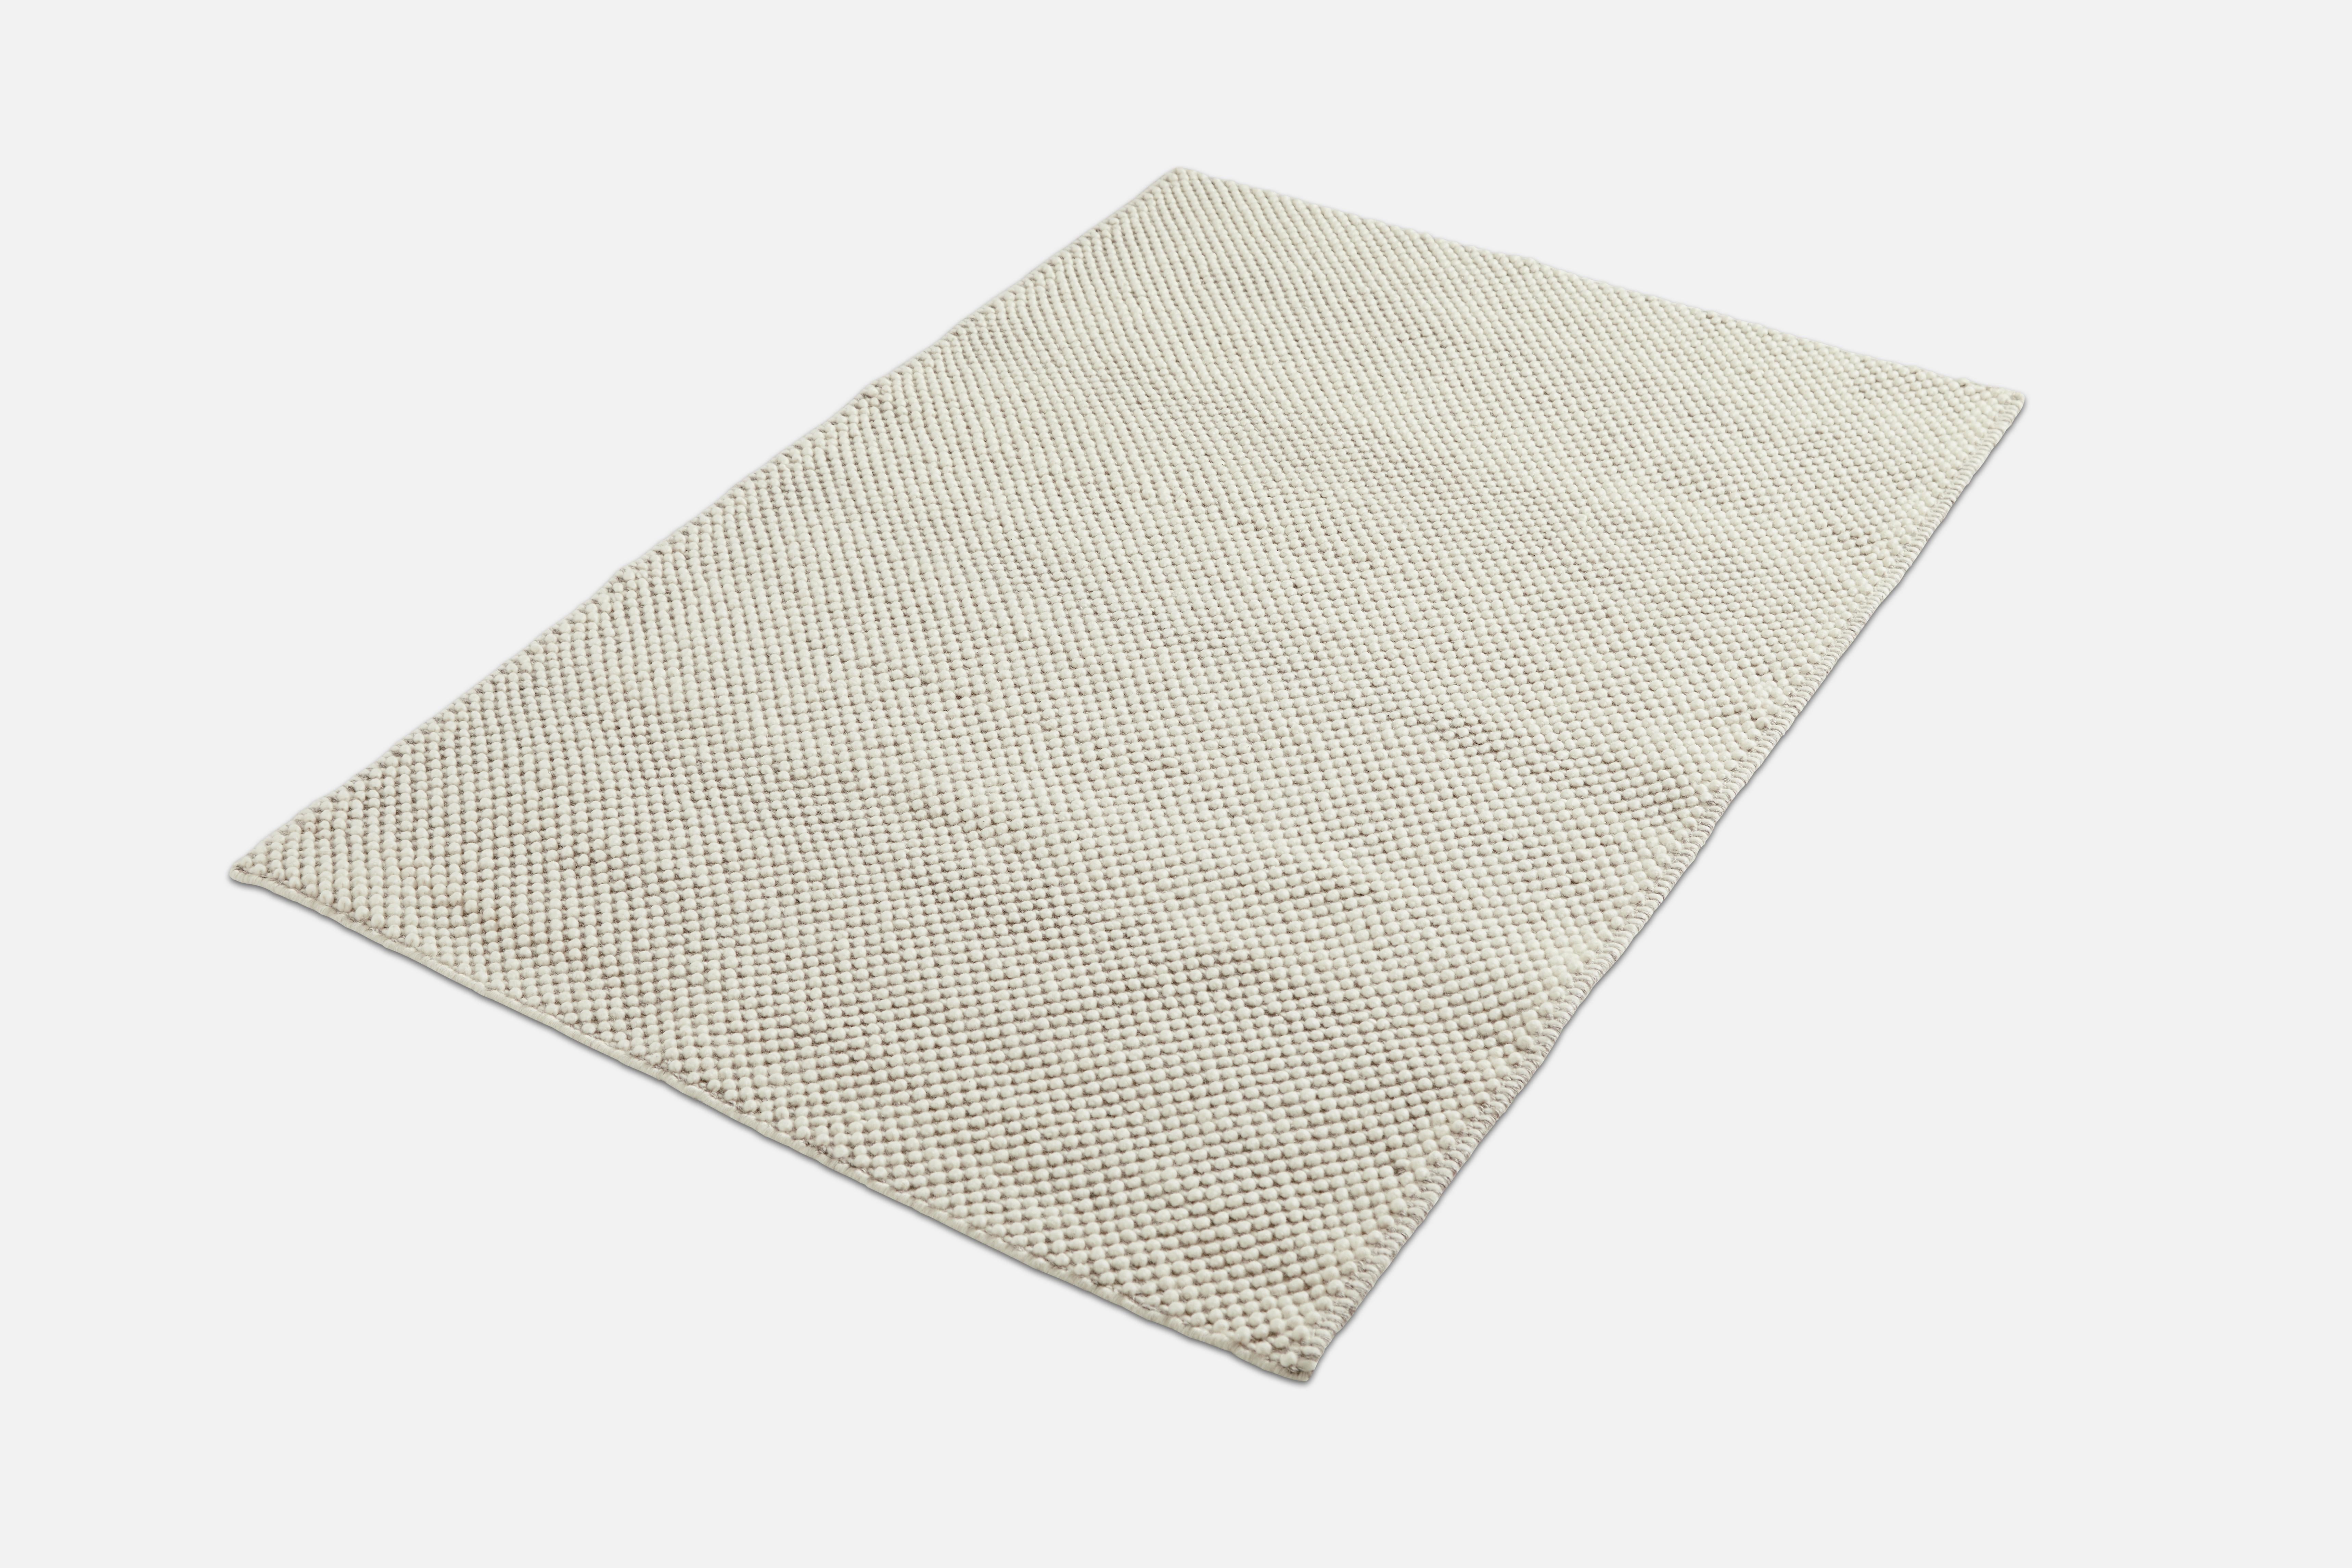 White tact rug by Shazeen
Materials: 90% wool, 10% cotton.
Dimensions: W 170 x L 200 cm
Available in 3 sizes: W 90 x L 140, W 170 x L 240, W 200 x L 300 cm.
Available in off white and dark grey.

Growing up as a child experiencing the inside